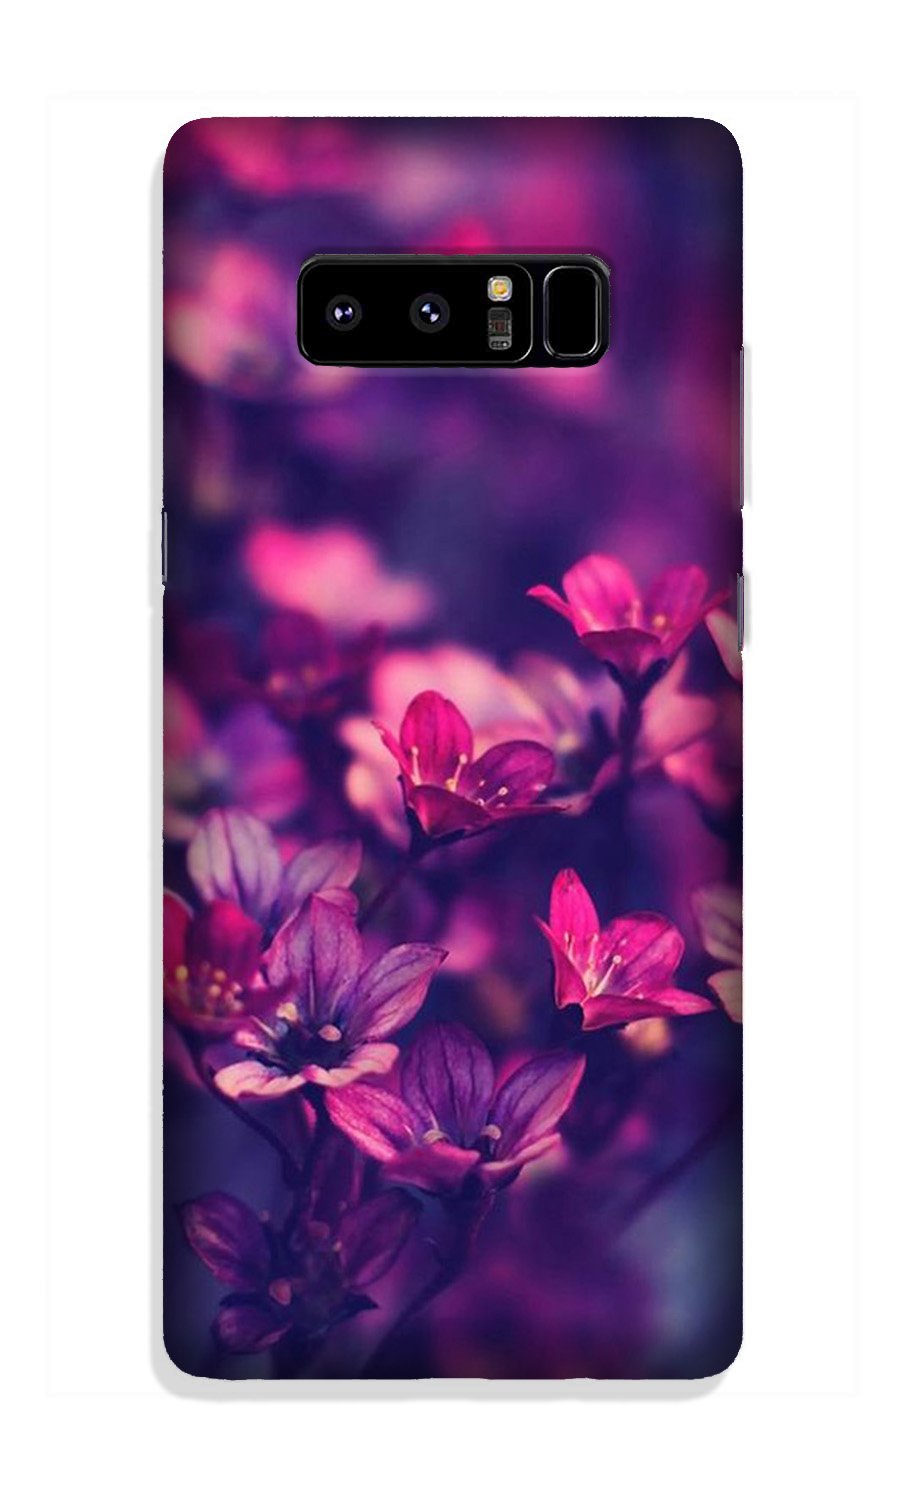 flowers Case for Galaxy Note 8